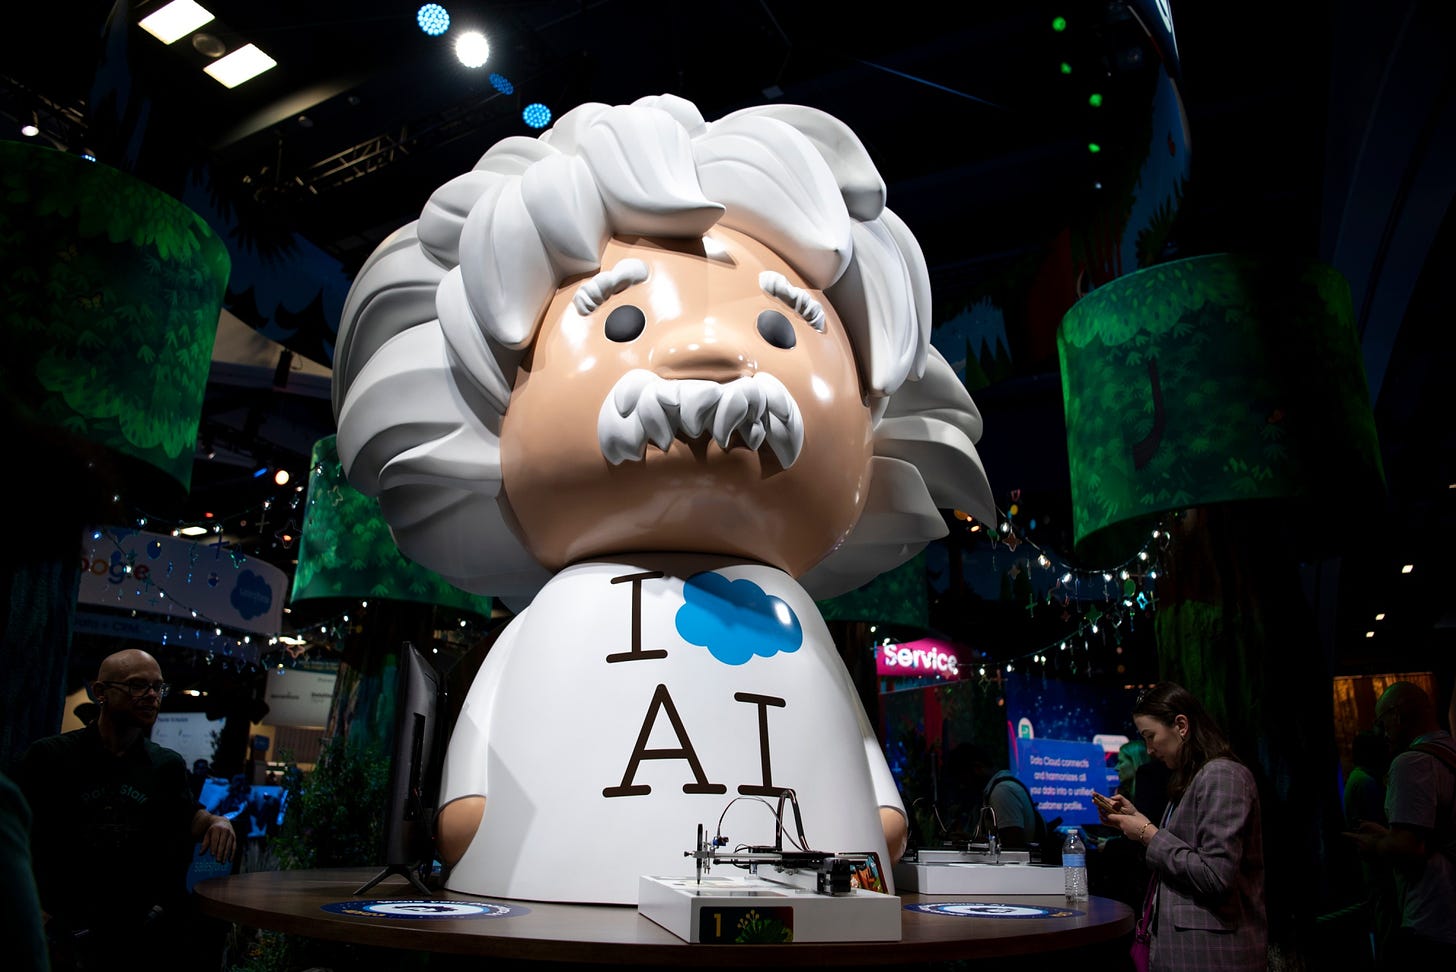 The long-dead scientist has found another&nbsp;life as a mascot of the software company’s AI features.